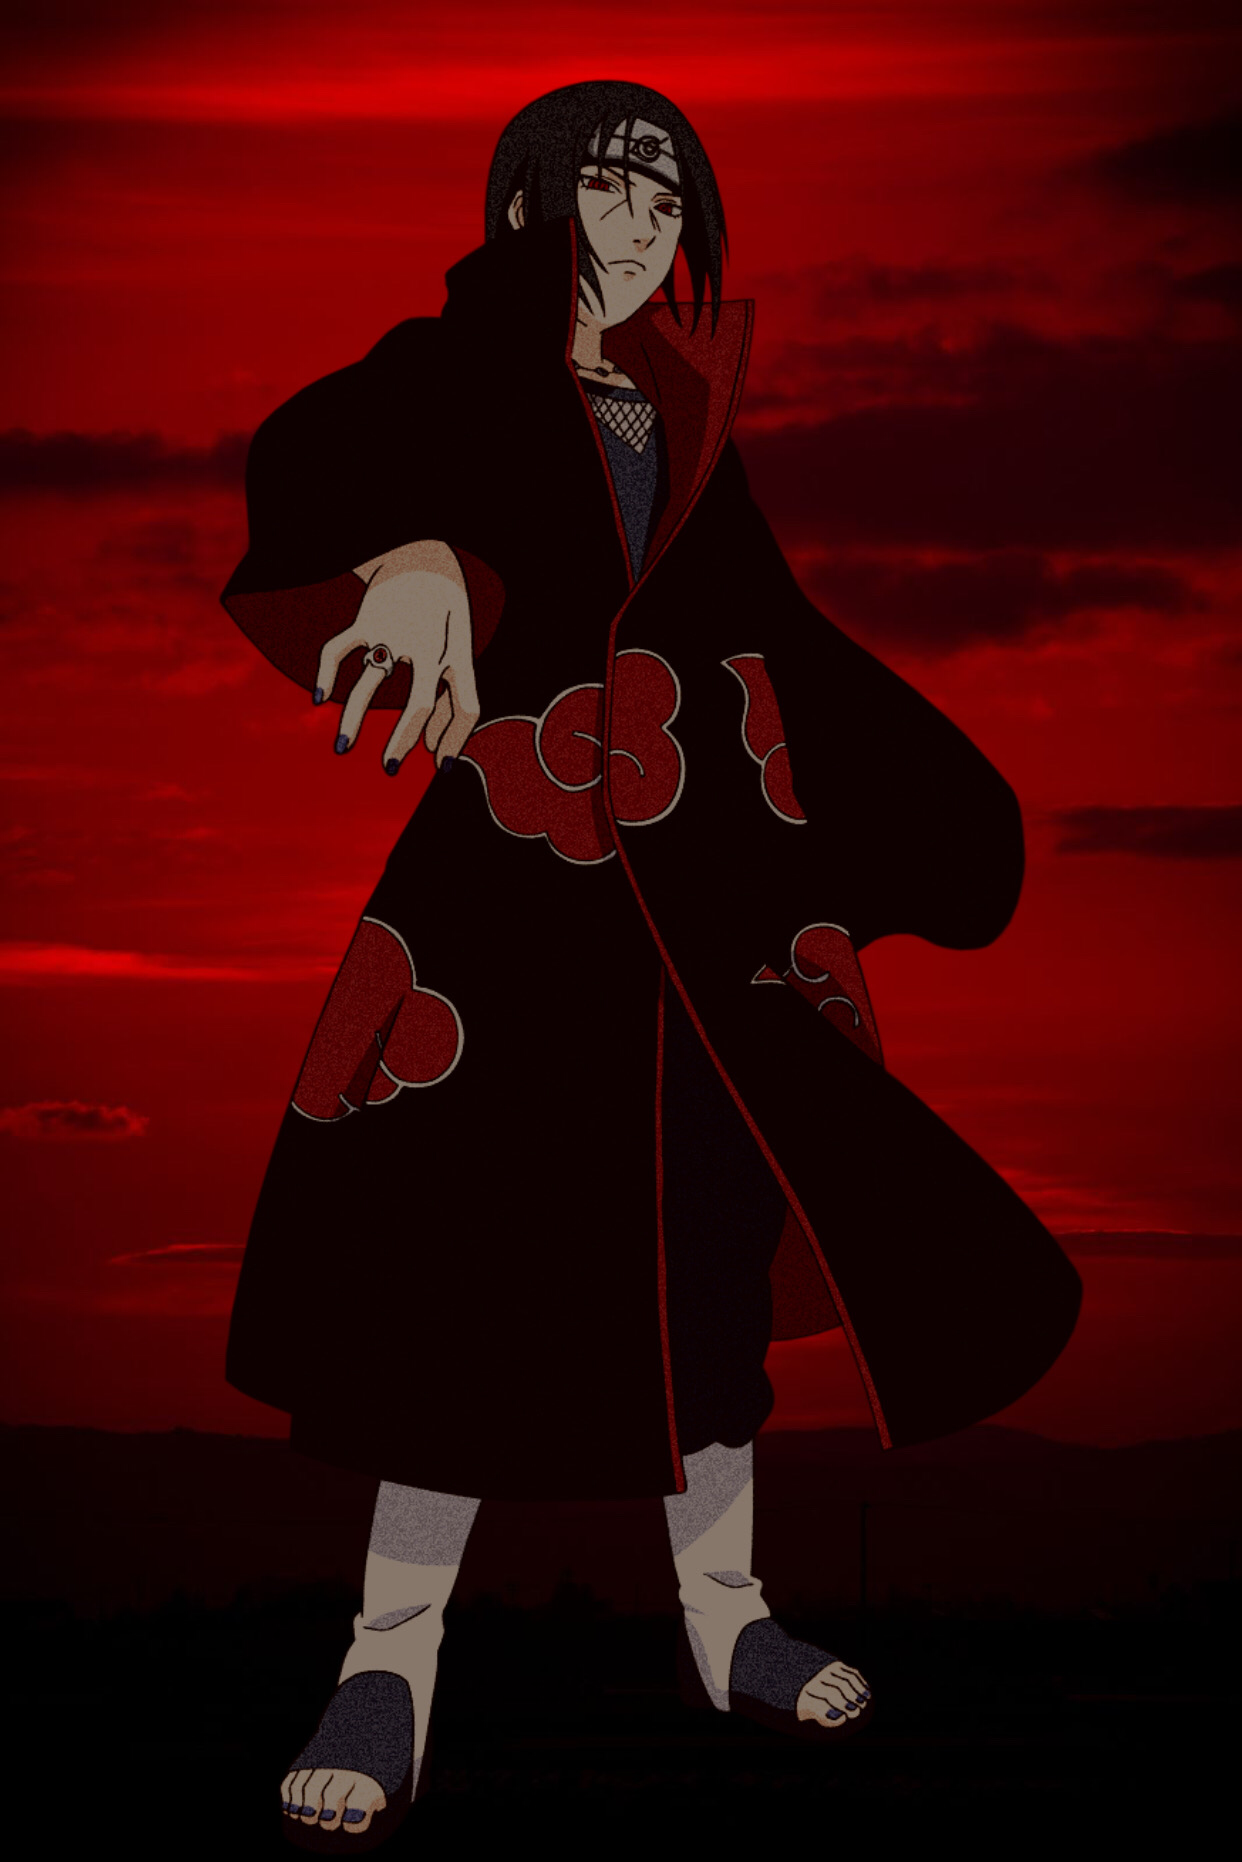 Made a itachi wallpaper quickly so it's pretty bad but here it is I'll make a better one